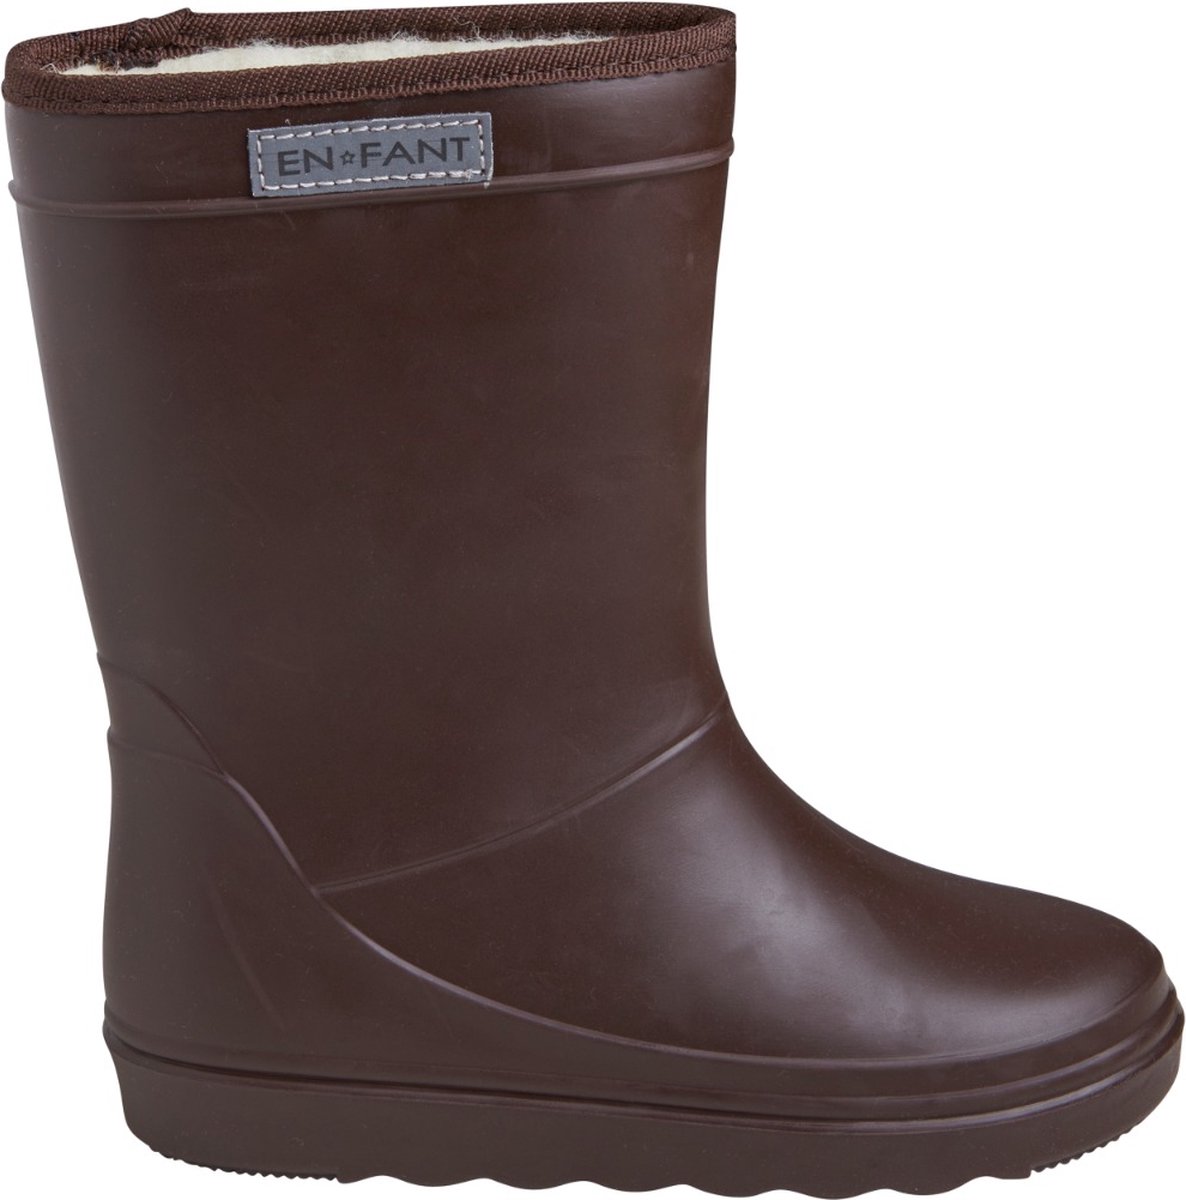 ENFANT THERMOBOOTS COFFEE BEAN-31